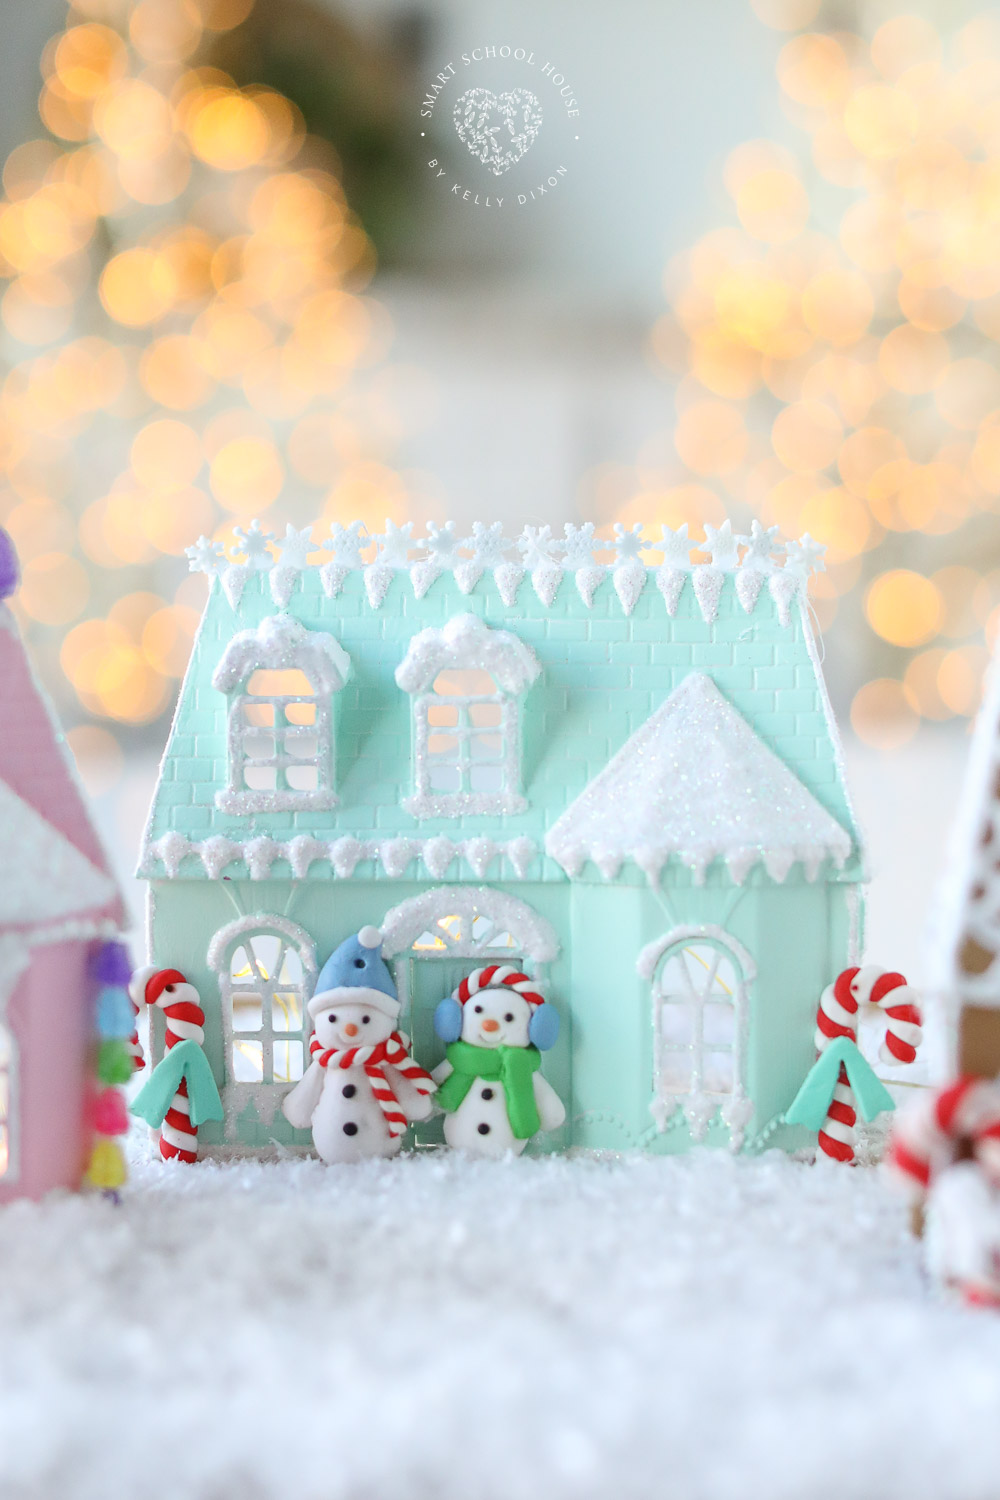 Teal gingerbread dollhouse with snowmen for Christmas